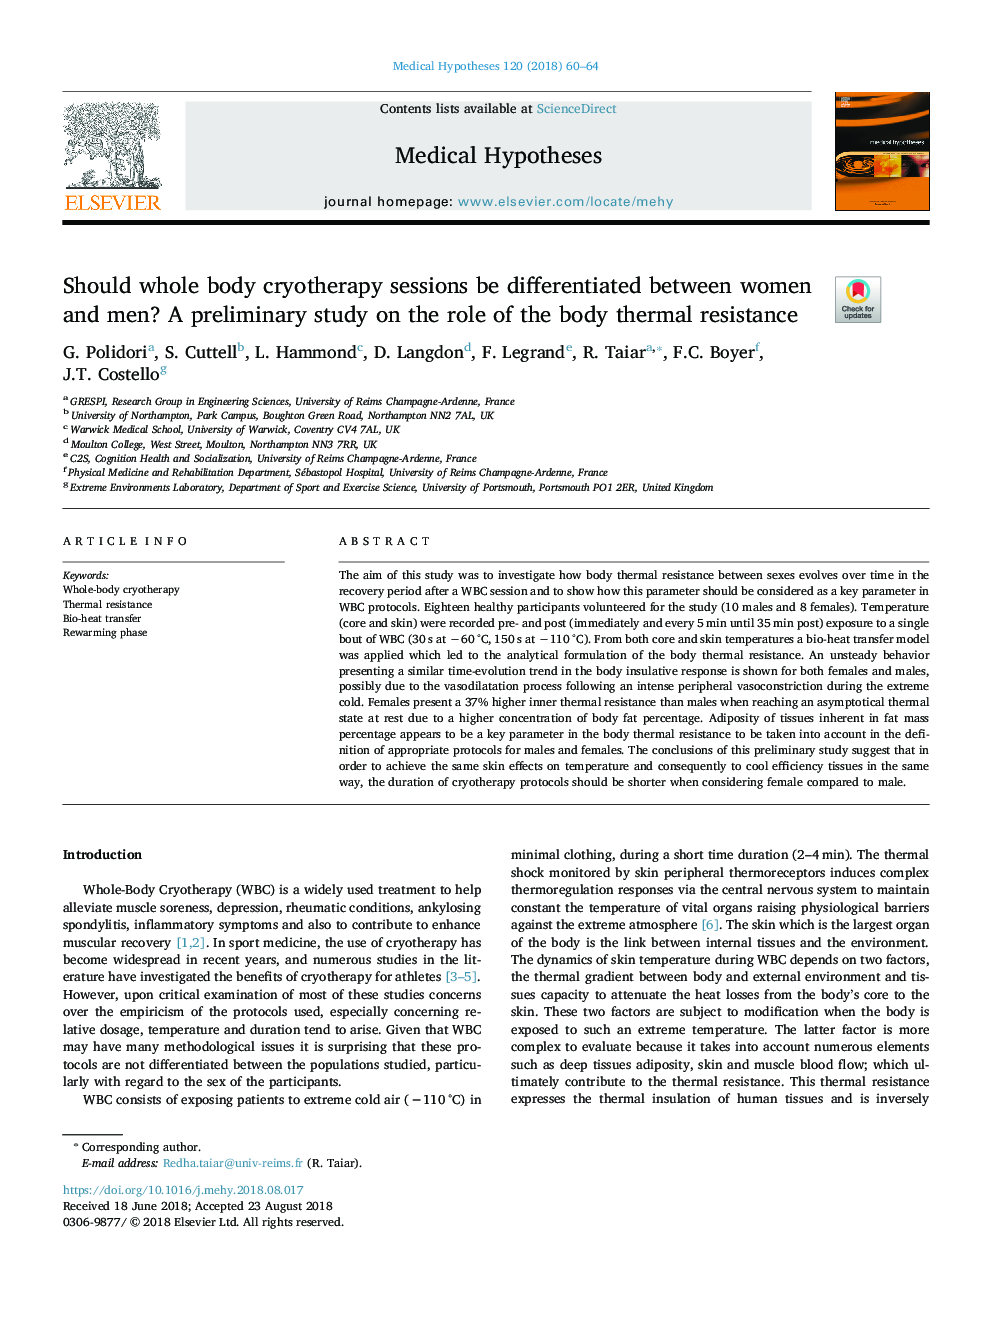 Should whole body cryotherapy sessions be differentiated between women and men? A preliminary study on the role of the body thermal resistance